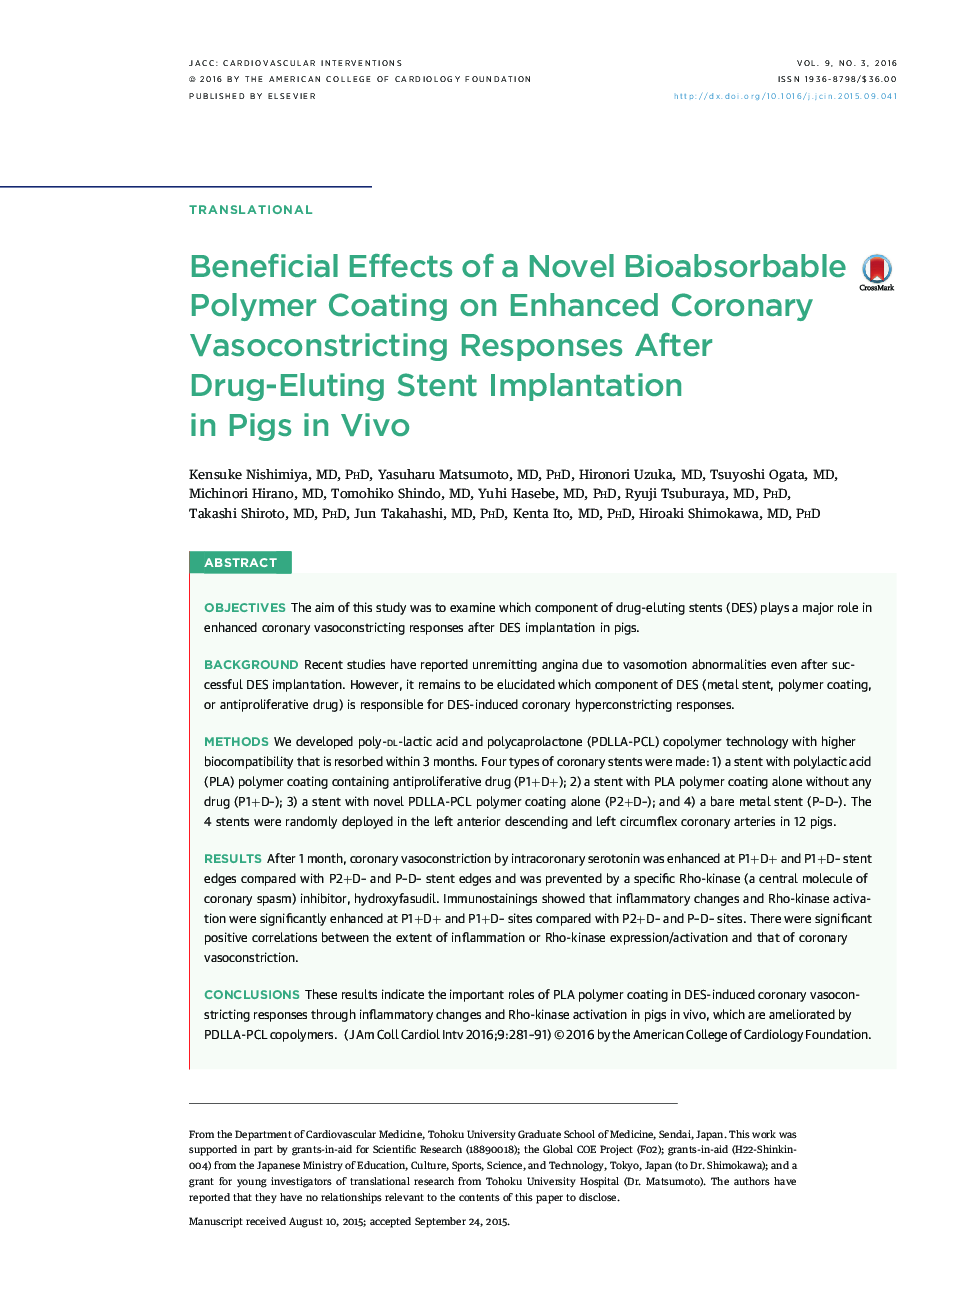 Beneficial Effects of a Novel Bioabsorbable Polymer Coating on Enhanced Coronary Vasoconstricting Responses After Drug-Eluting Stent Implantation in Pigs inÂ Vivo